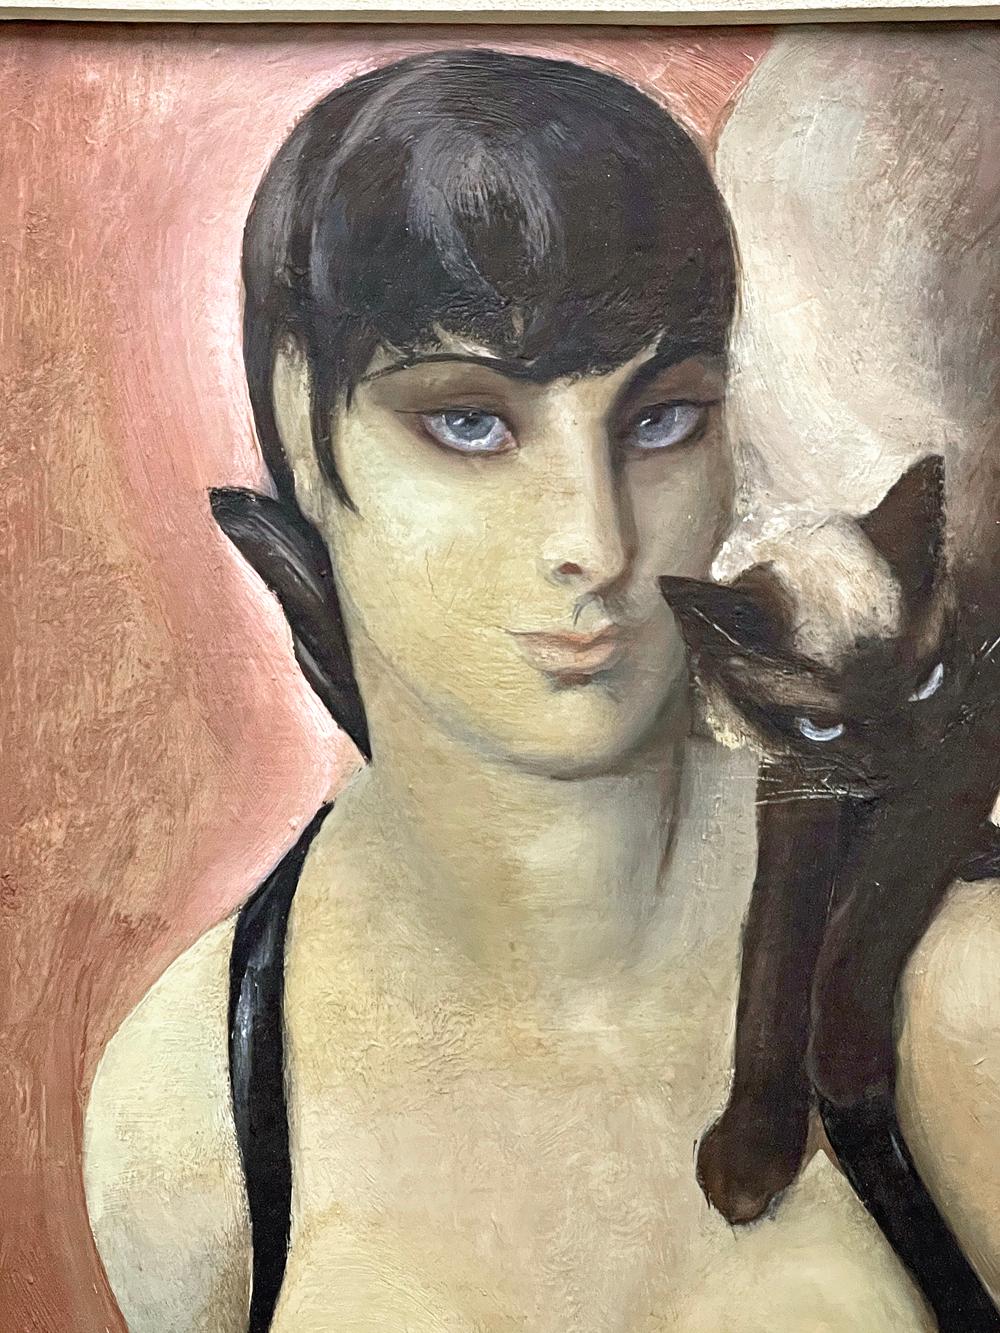 The artist behind this striking and original Art Deco portrait -- Agnes Tait -- is clearly emphasizing the parallels between a female figure and her Siamese cat, both shown with heavily-shadowed blue eyes and short, dark hair, the feline crouching